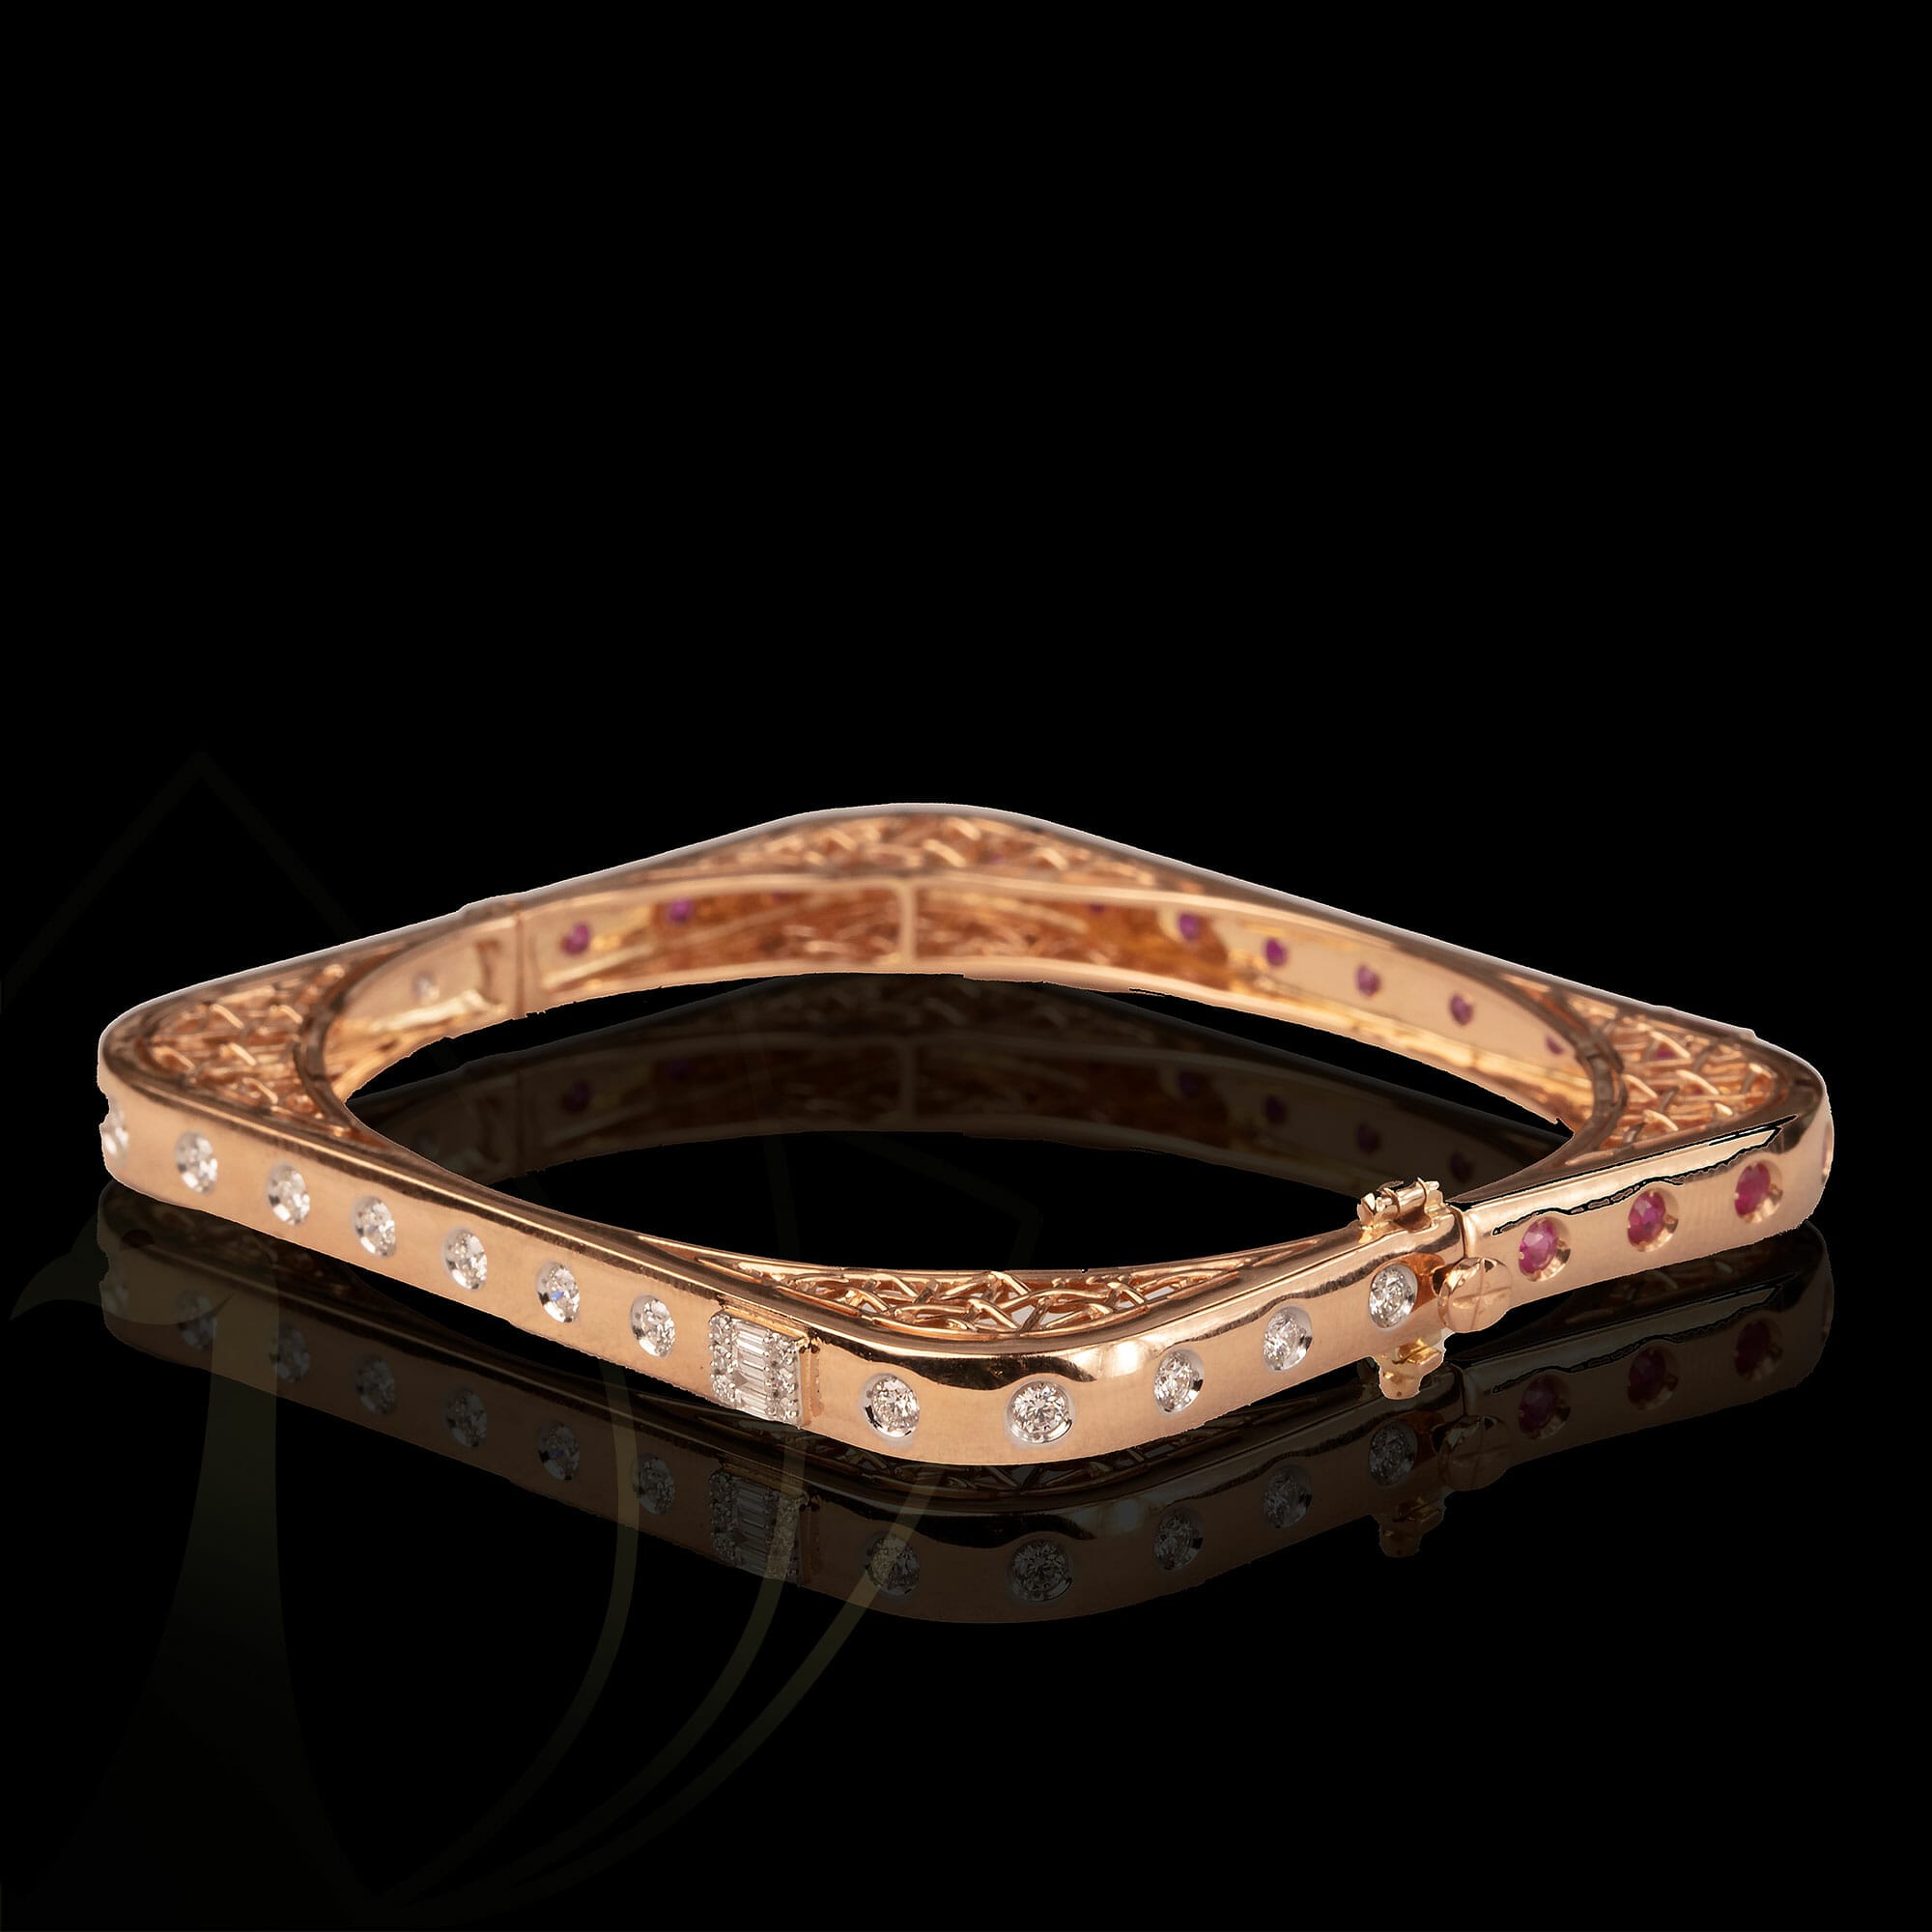 The sassy chic square diamond bangle in trendy rose gold.